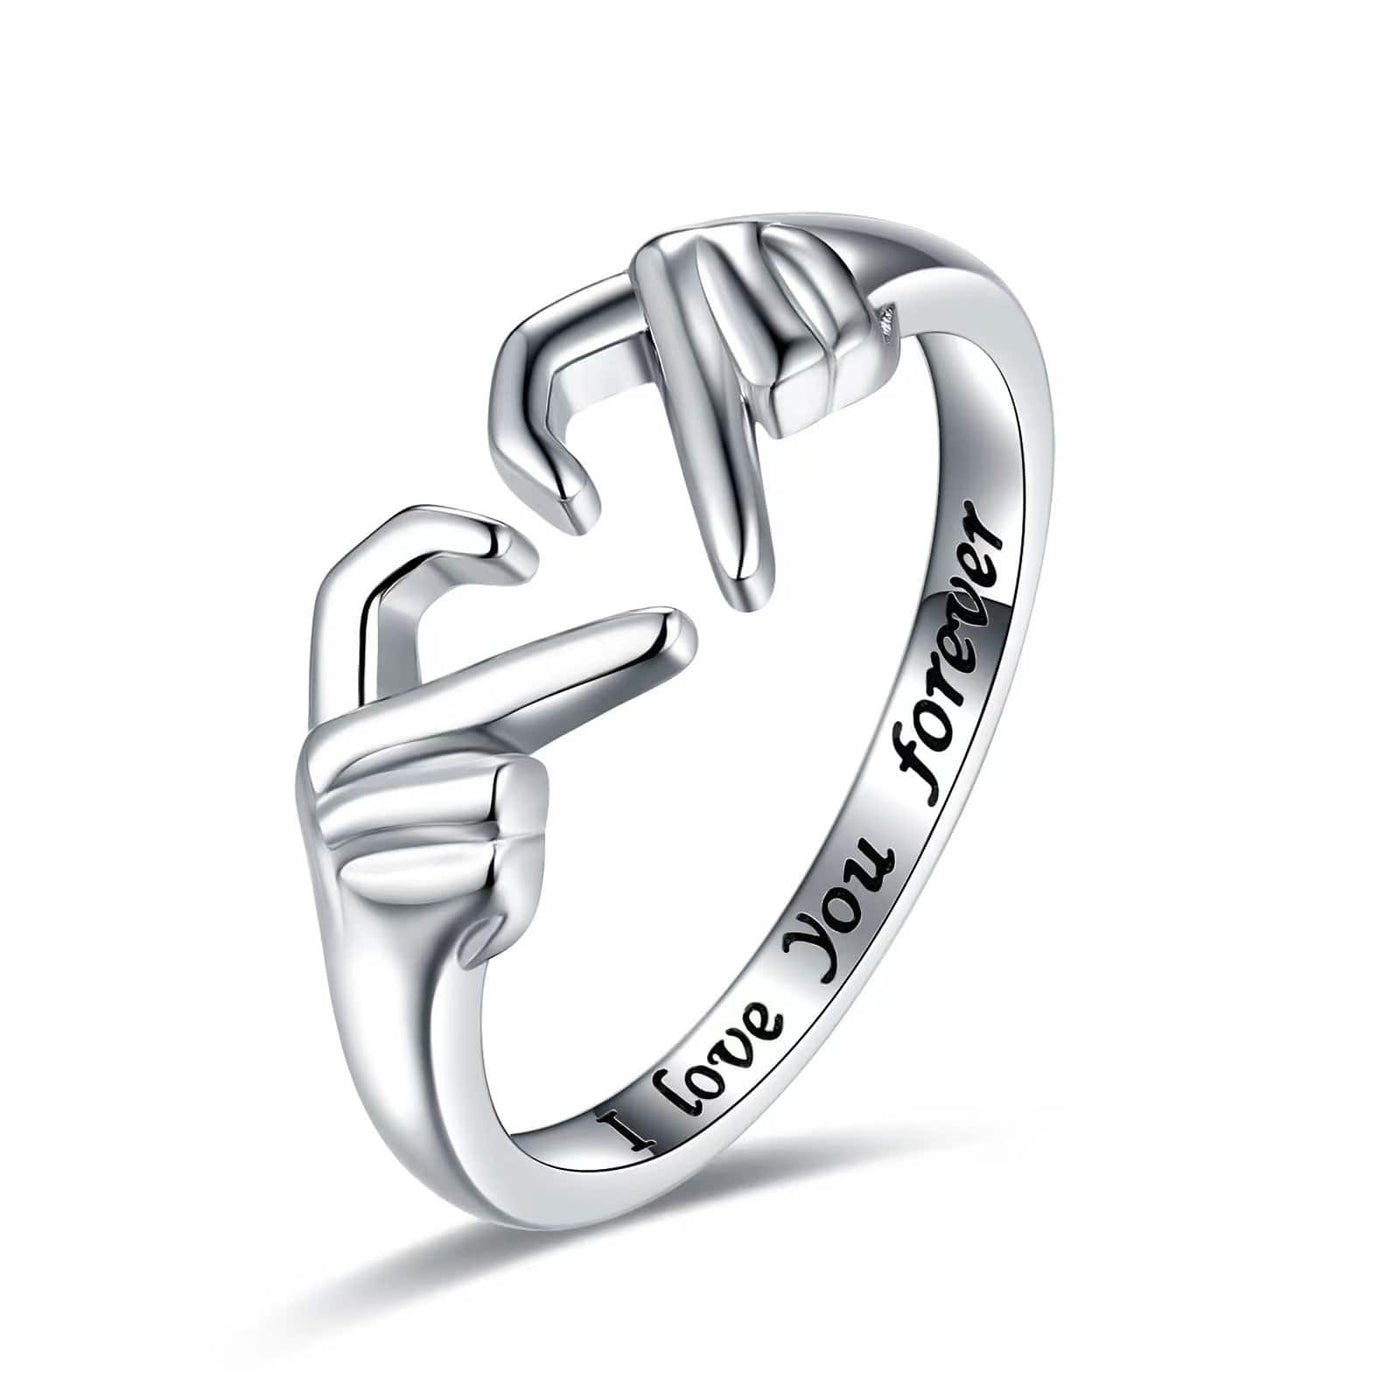 Ring - Unisex Love Hands Heart Adjustable Couple Ring